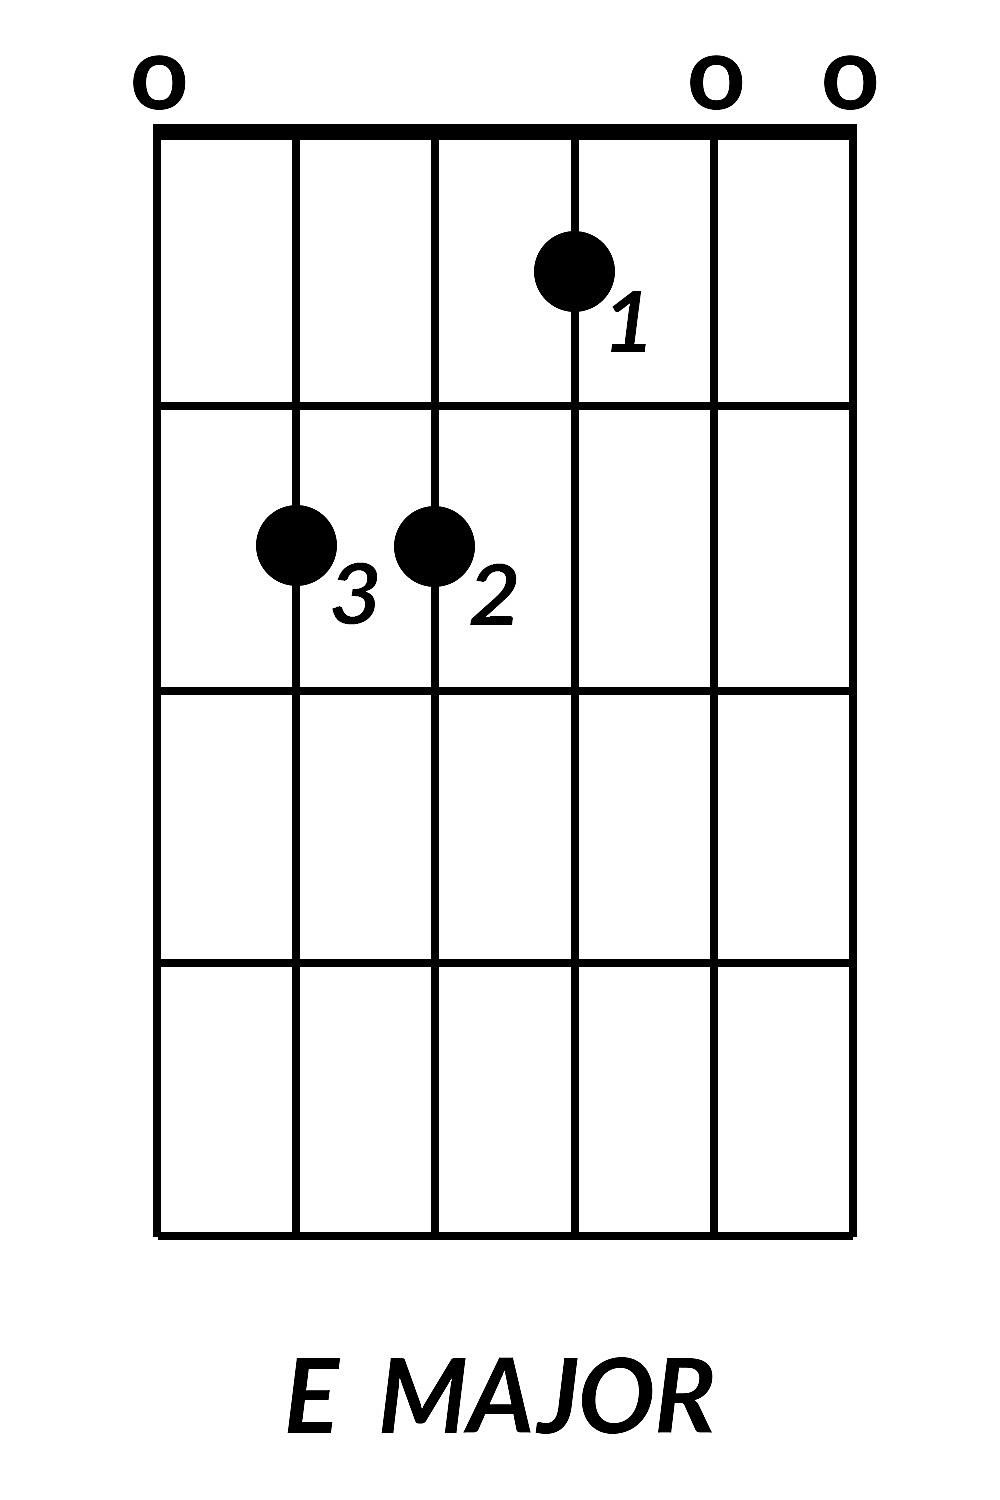 How To Play Guitar Chords How To Play Basic Guitar Chords For Beginners Yederberglauf